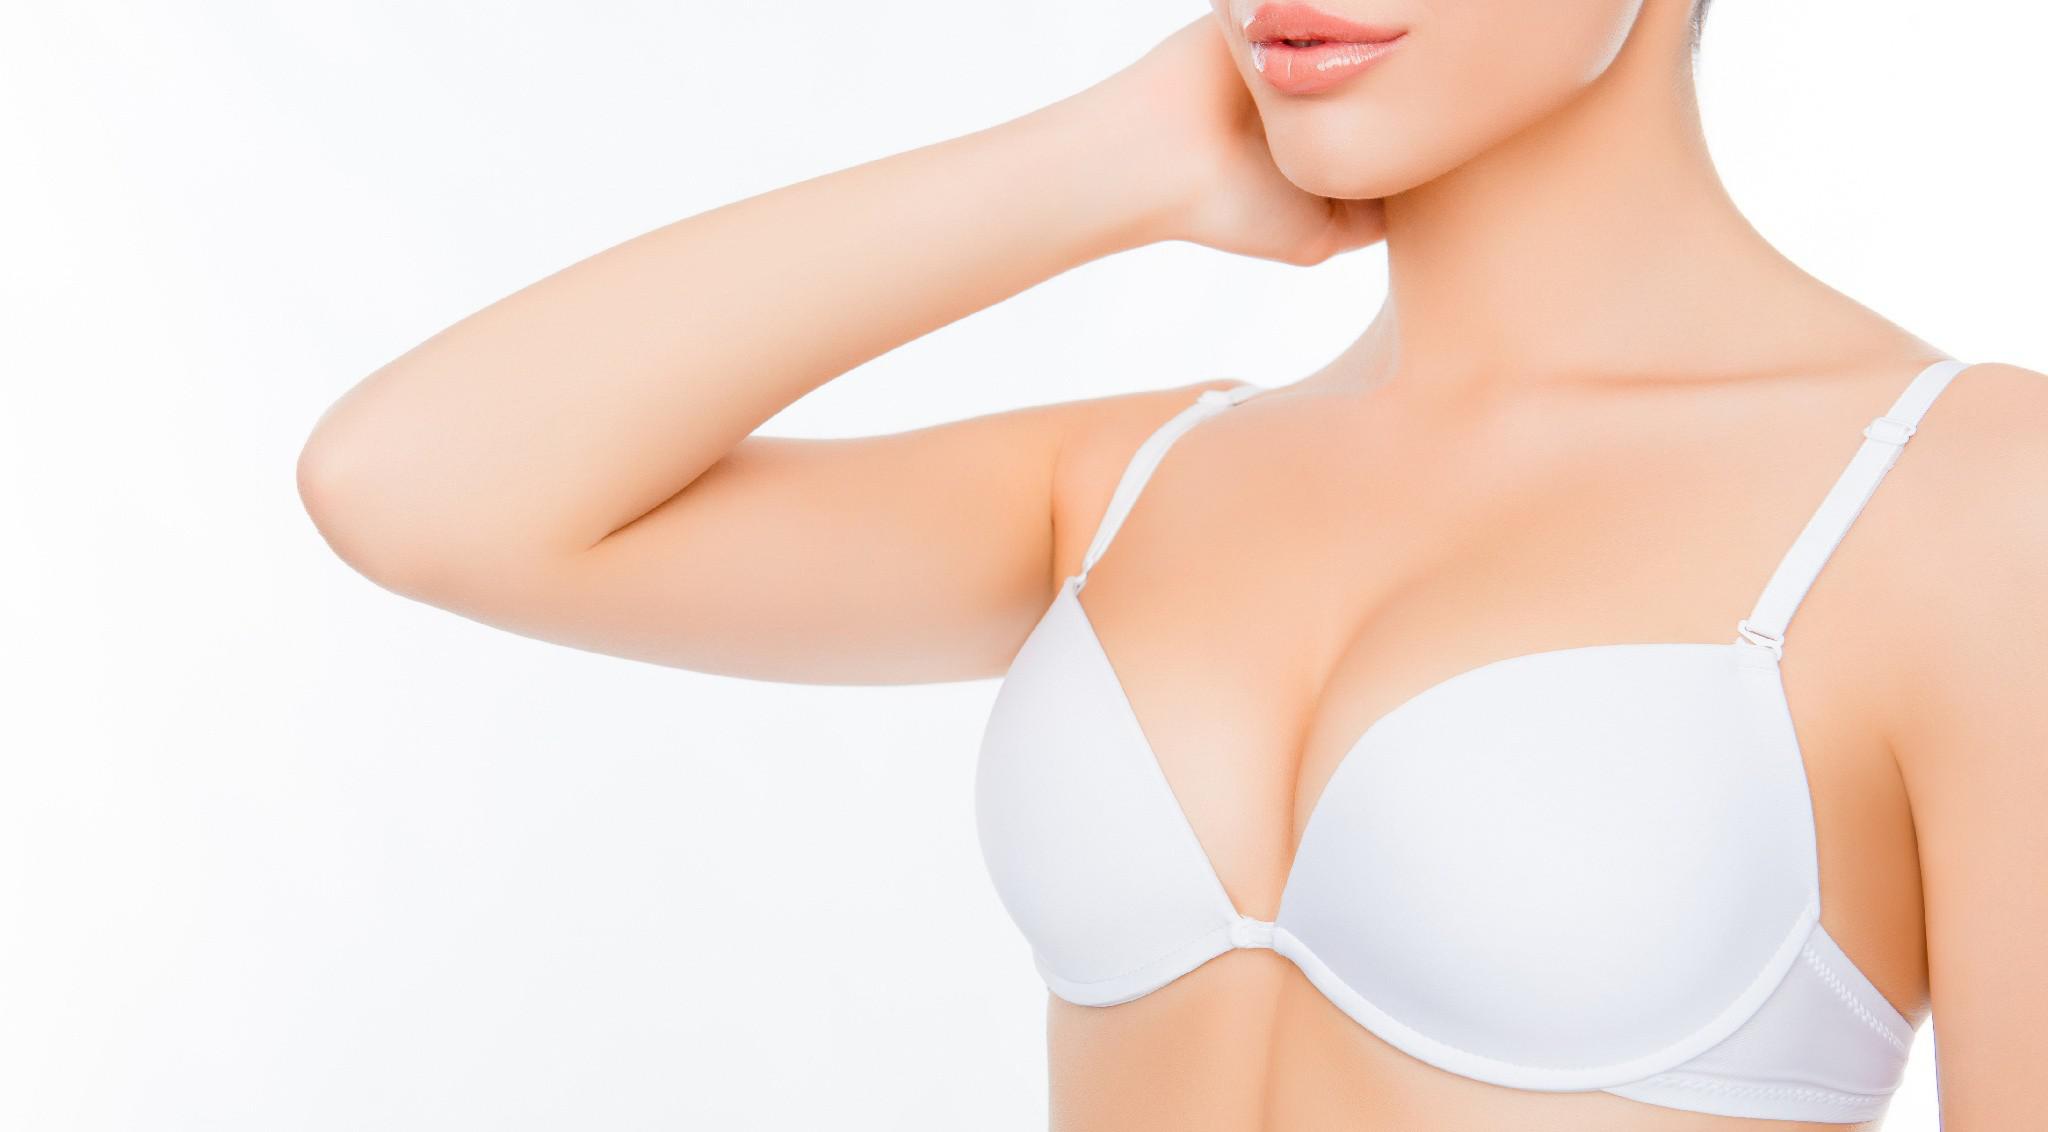 Procedure Involves in Breast Implant Surgery, by Will Chan